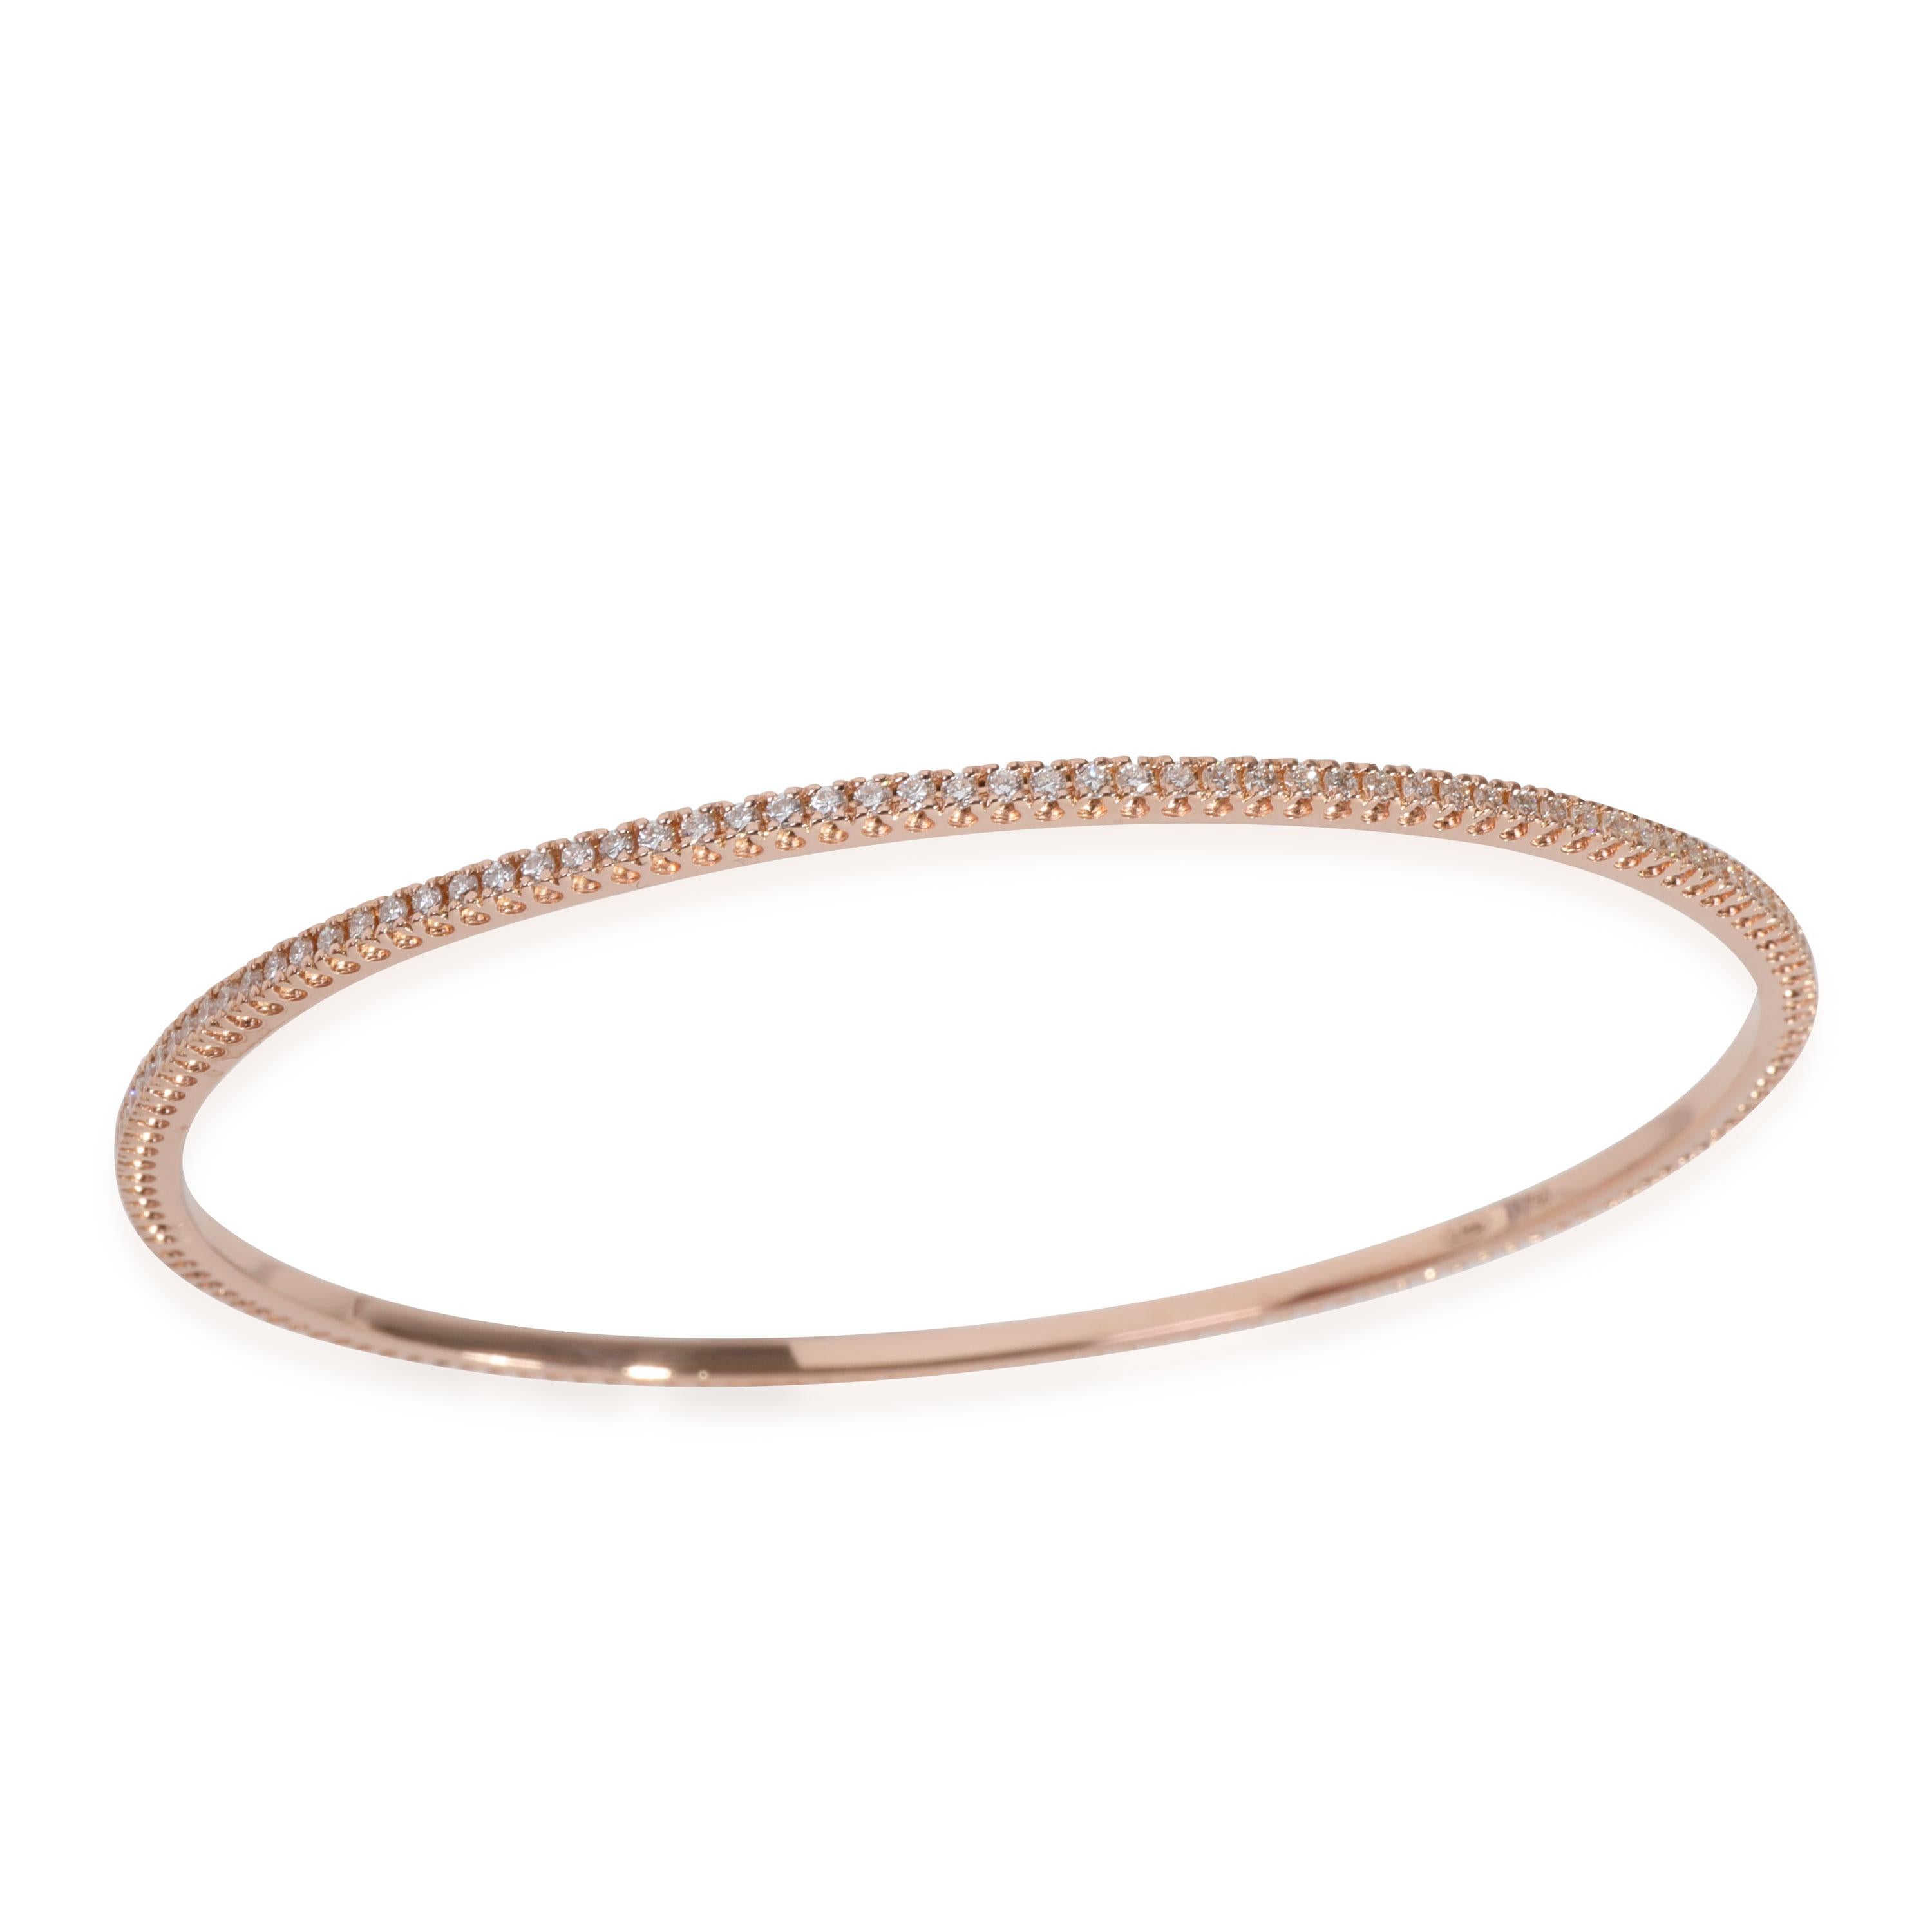 La Reina Diamond Bangle in 18k Rose Gold 1 CTW In Excellent Condition For Sale In New York, NY